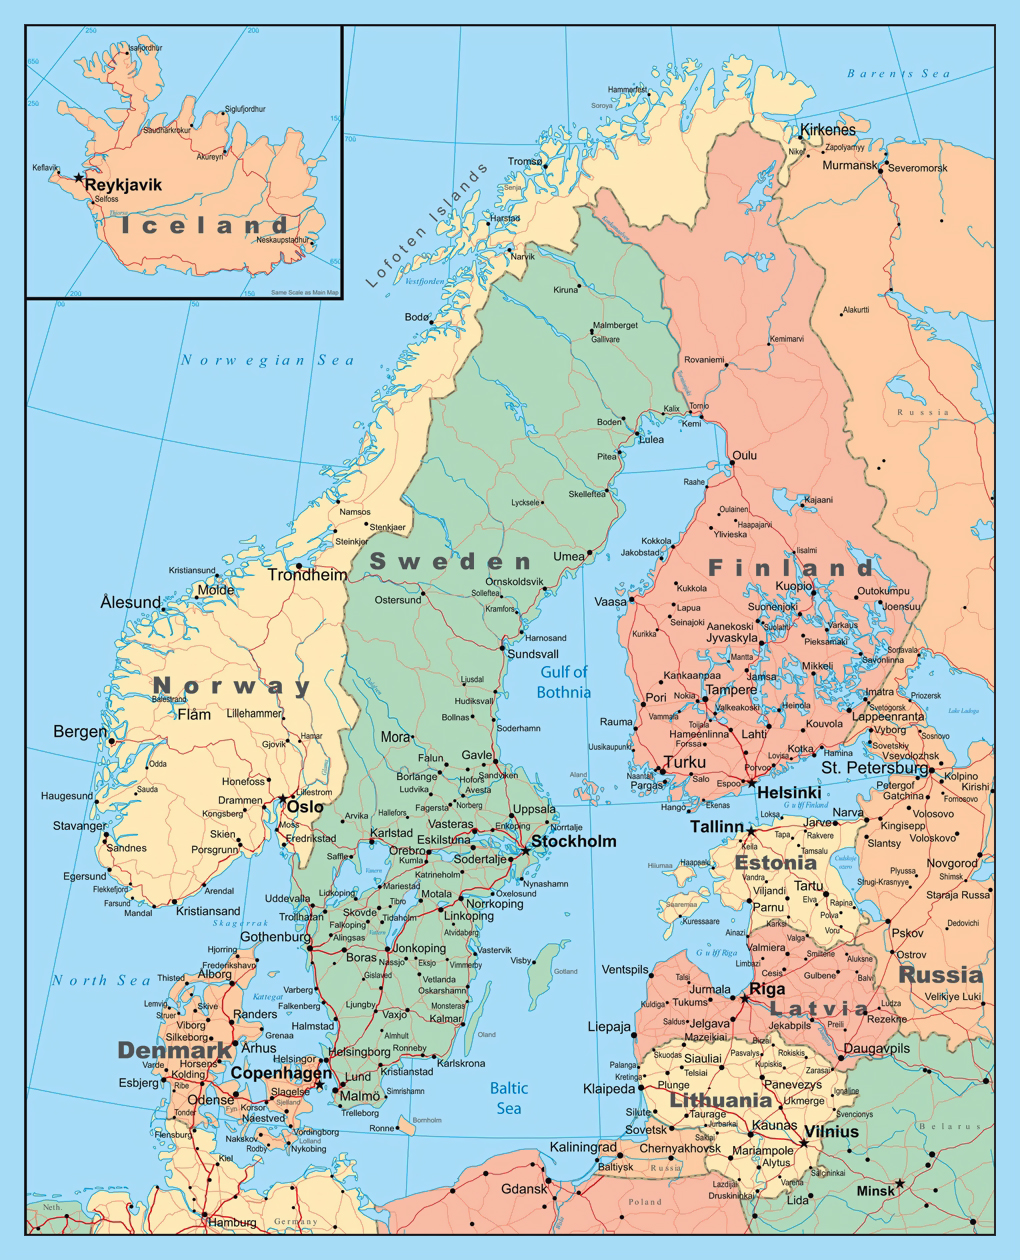 Maps of Baltic and Scandinavia | Detailed Political, Relief, Road and